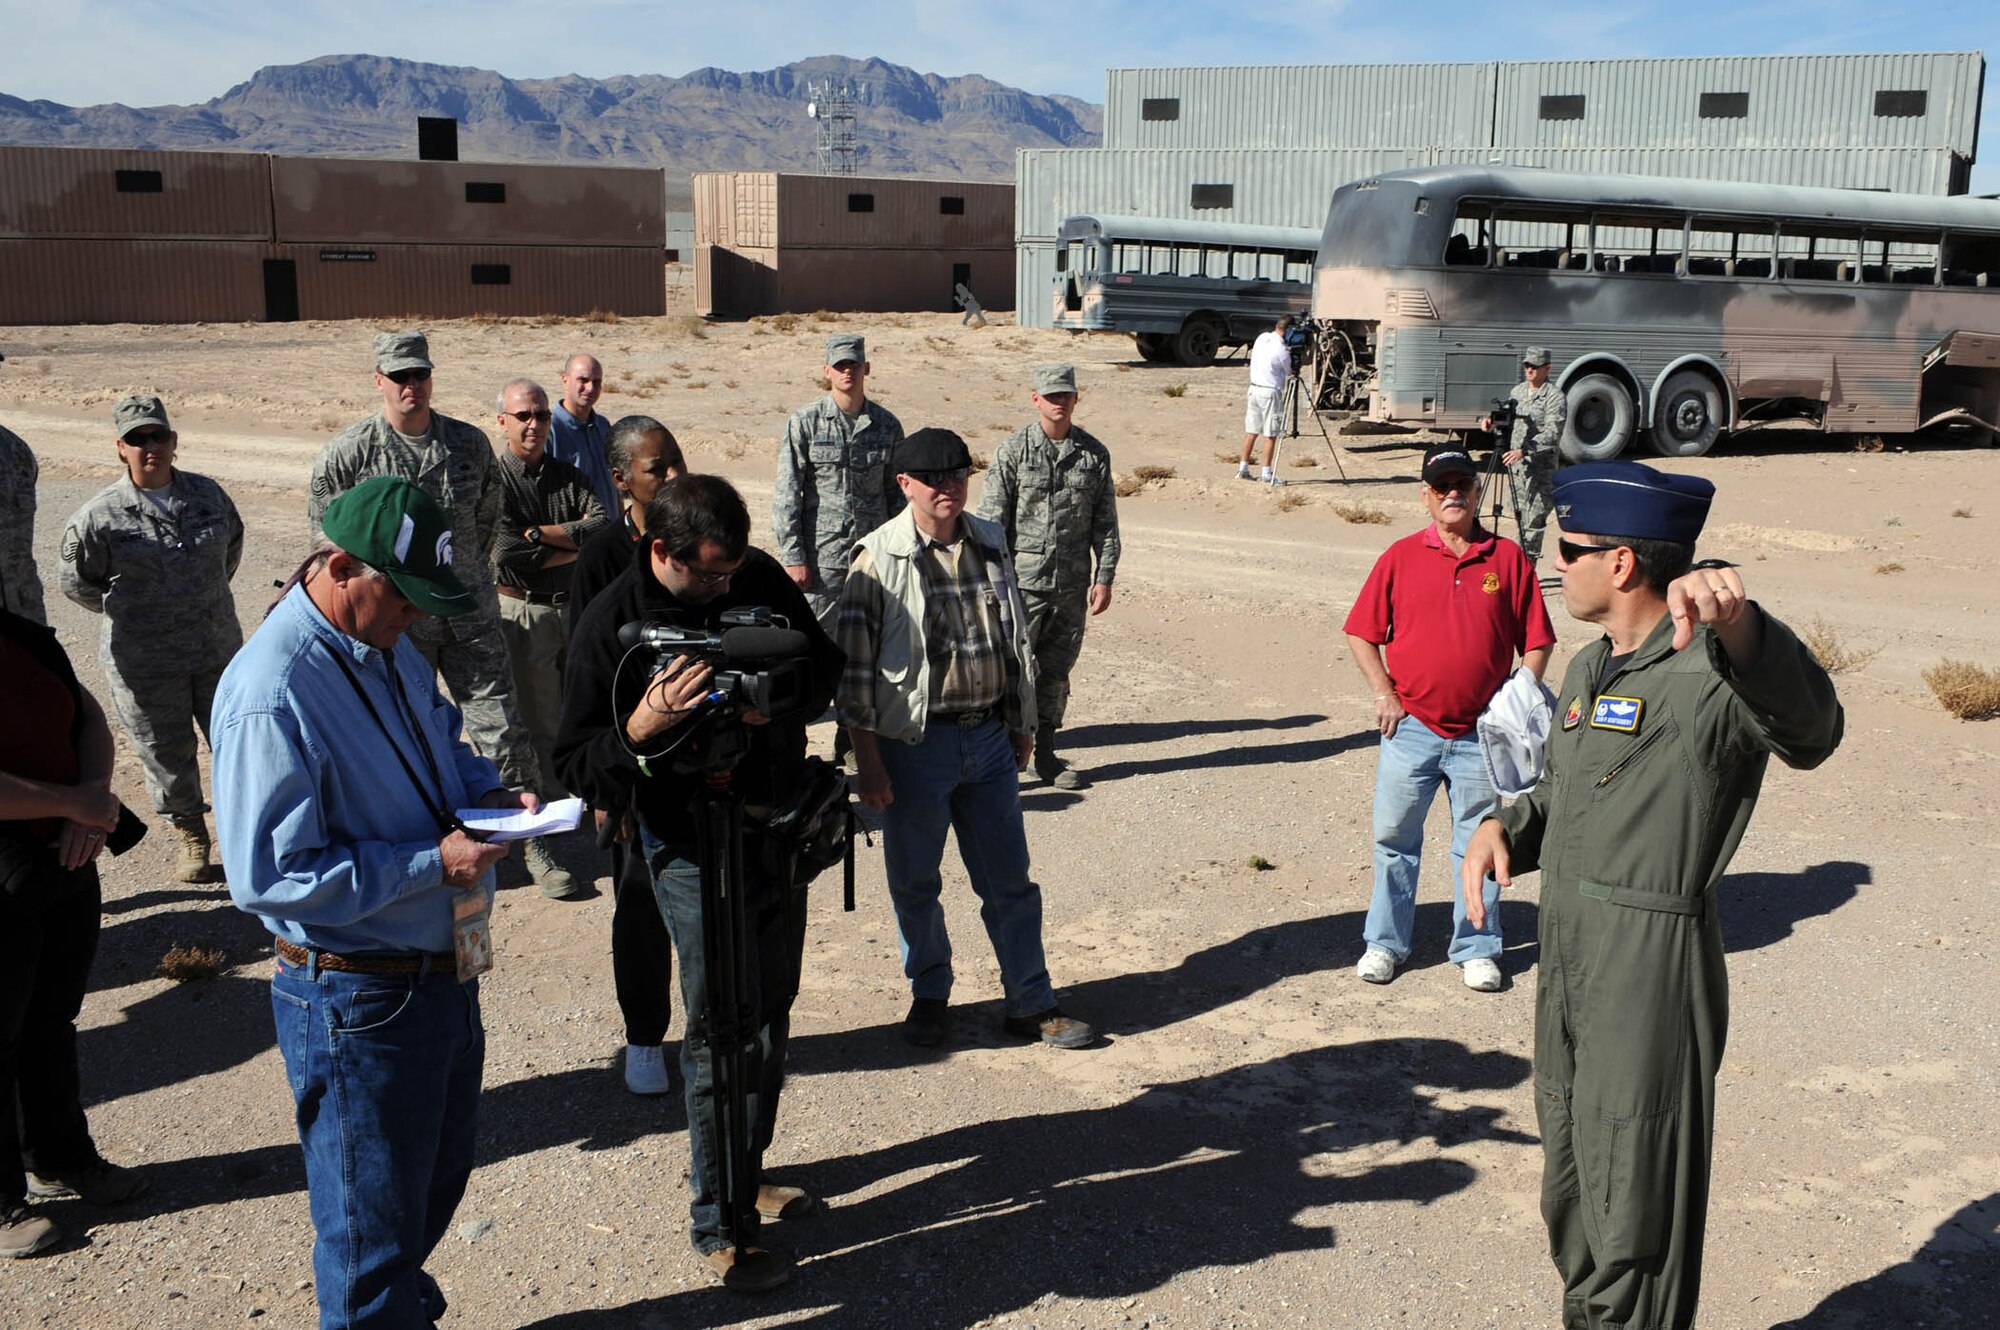 NEVADA TEST AND TRAINING RANGE-- Col. John P. Montgomery, 98th RANW commander, speaks to a group during a tour of the Urban Operations Complex Thursday Nov. 5, 2009. Civic leaders and media visited the UOC for the first time ever to view training operations. (U.S. Air Force photo by Tech. Sgt. Michael R. Holzworth)